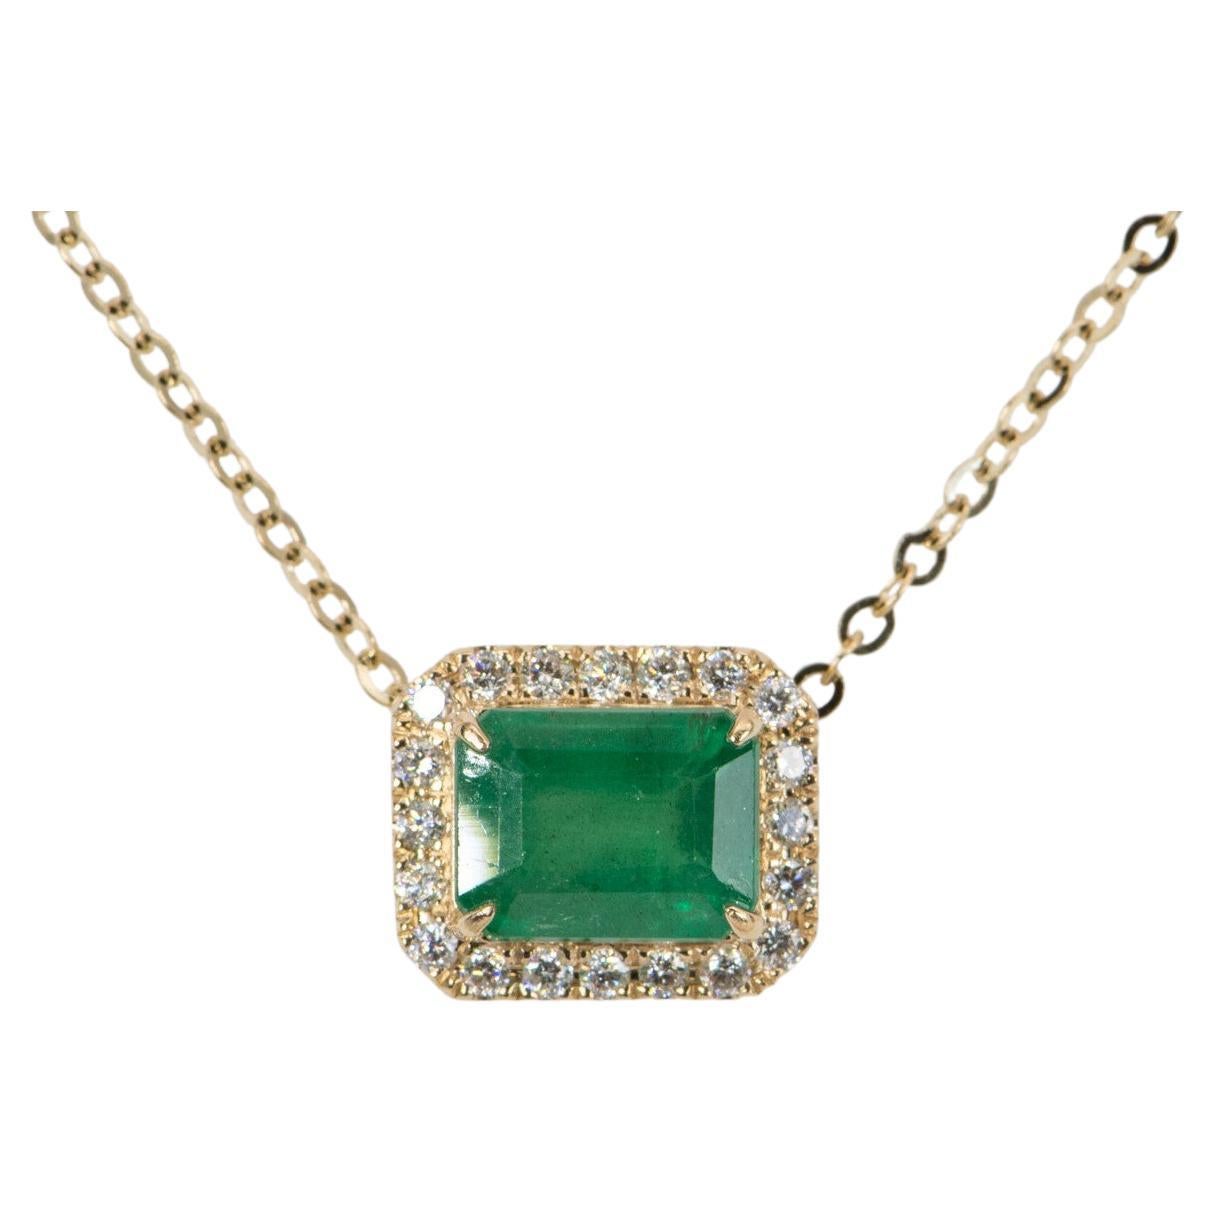 1.74ct Emerald with Diamond Halo 14K Yellow Gold Pendant Necklace Chain R4058